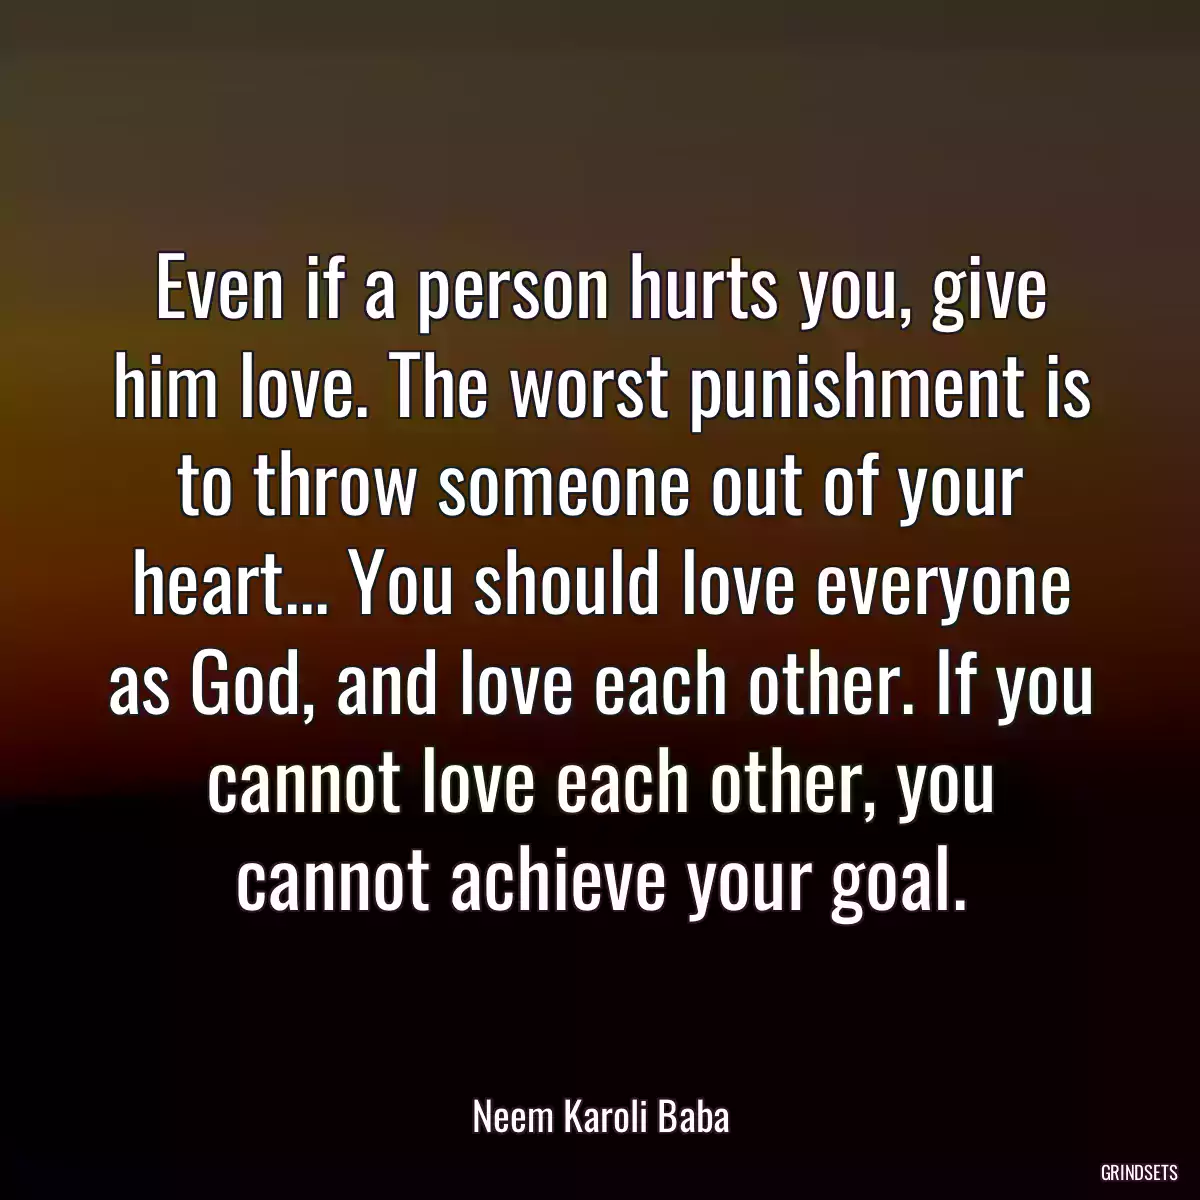 Even if a person hurts you, give him love. The worst punishment is to throw someone out of your heart... You should love everyone as God, and love each other. If you cannot love each other, you cannot achieve your goal.